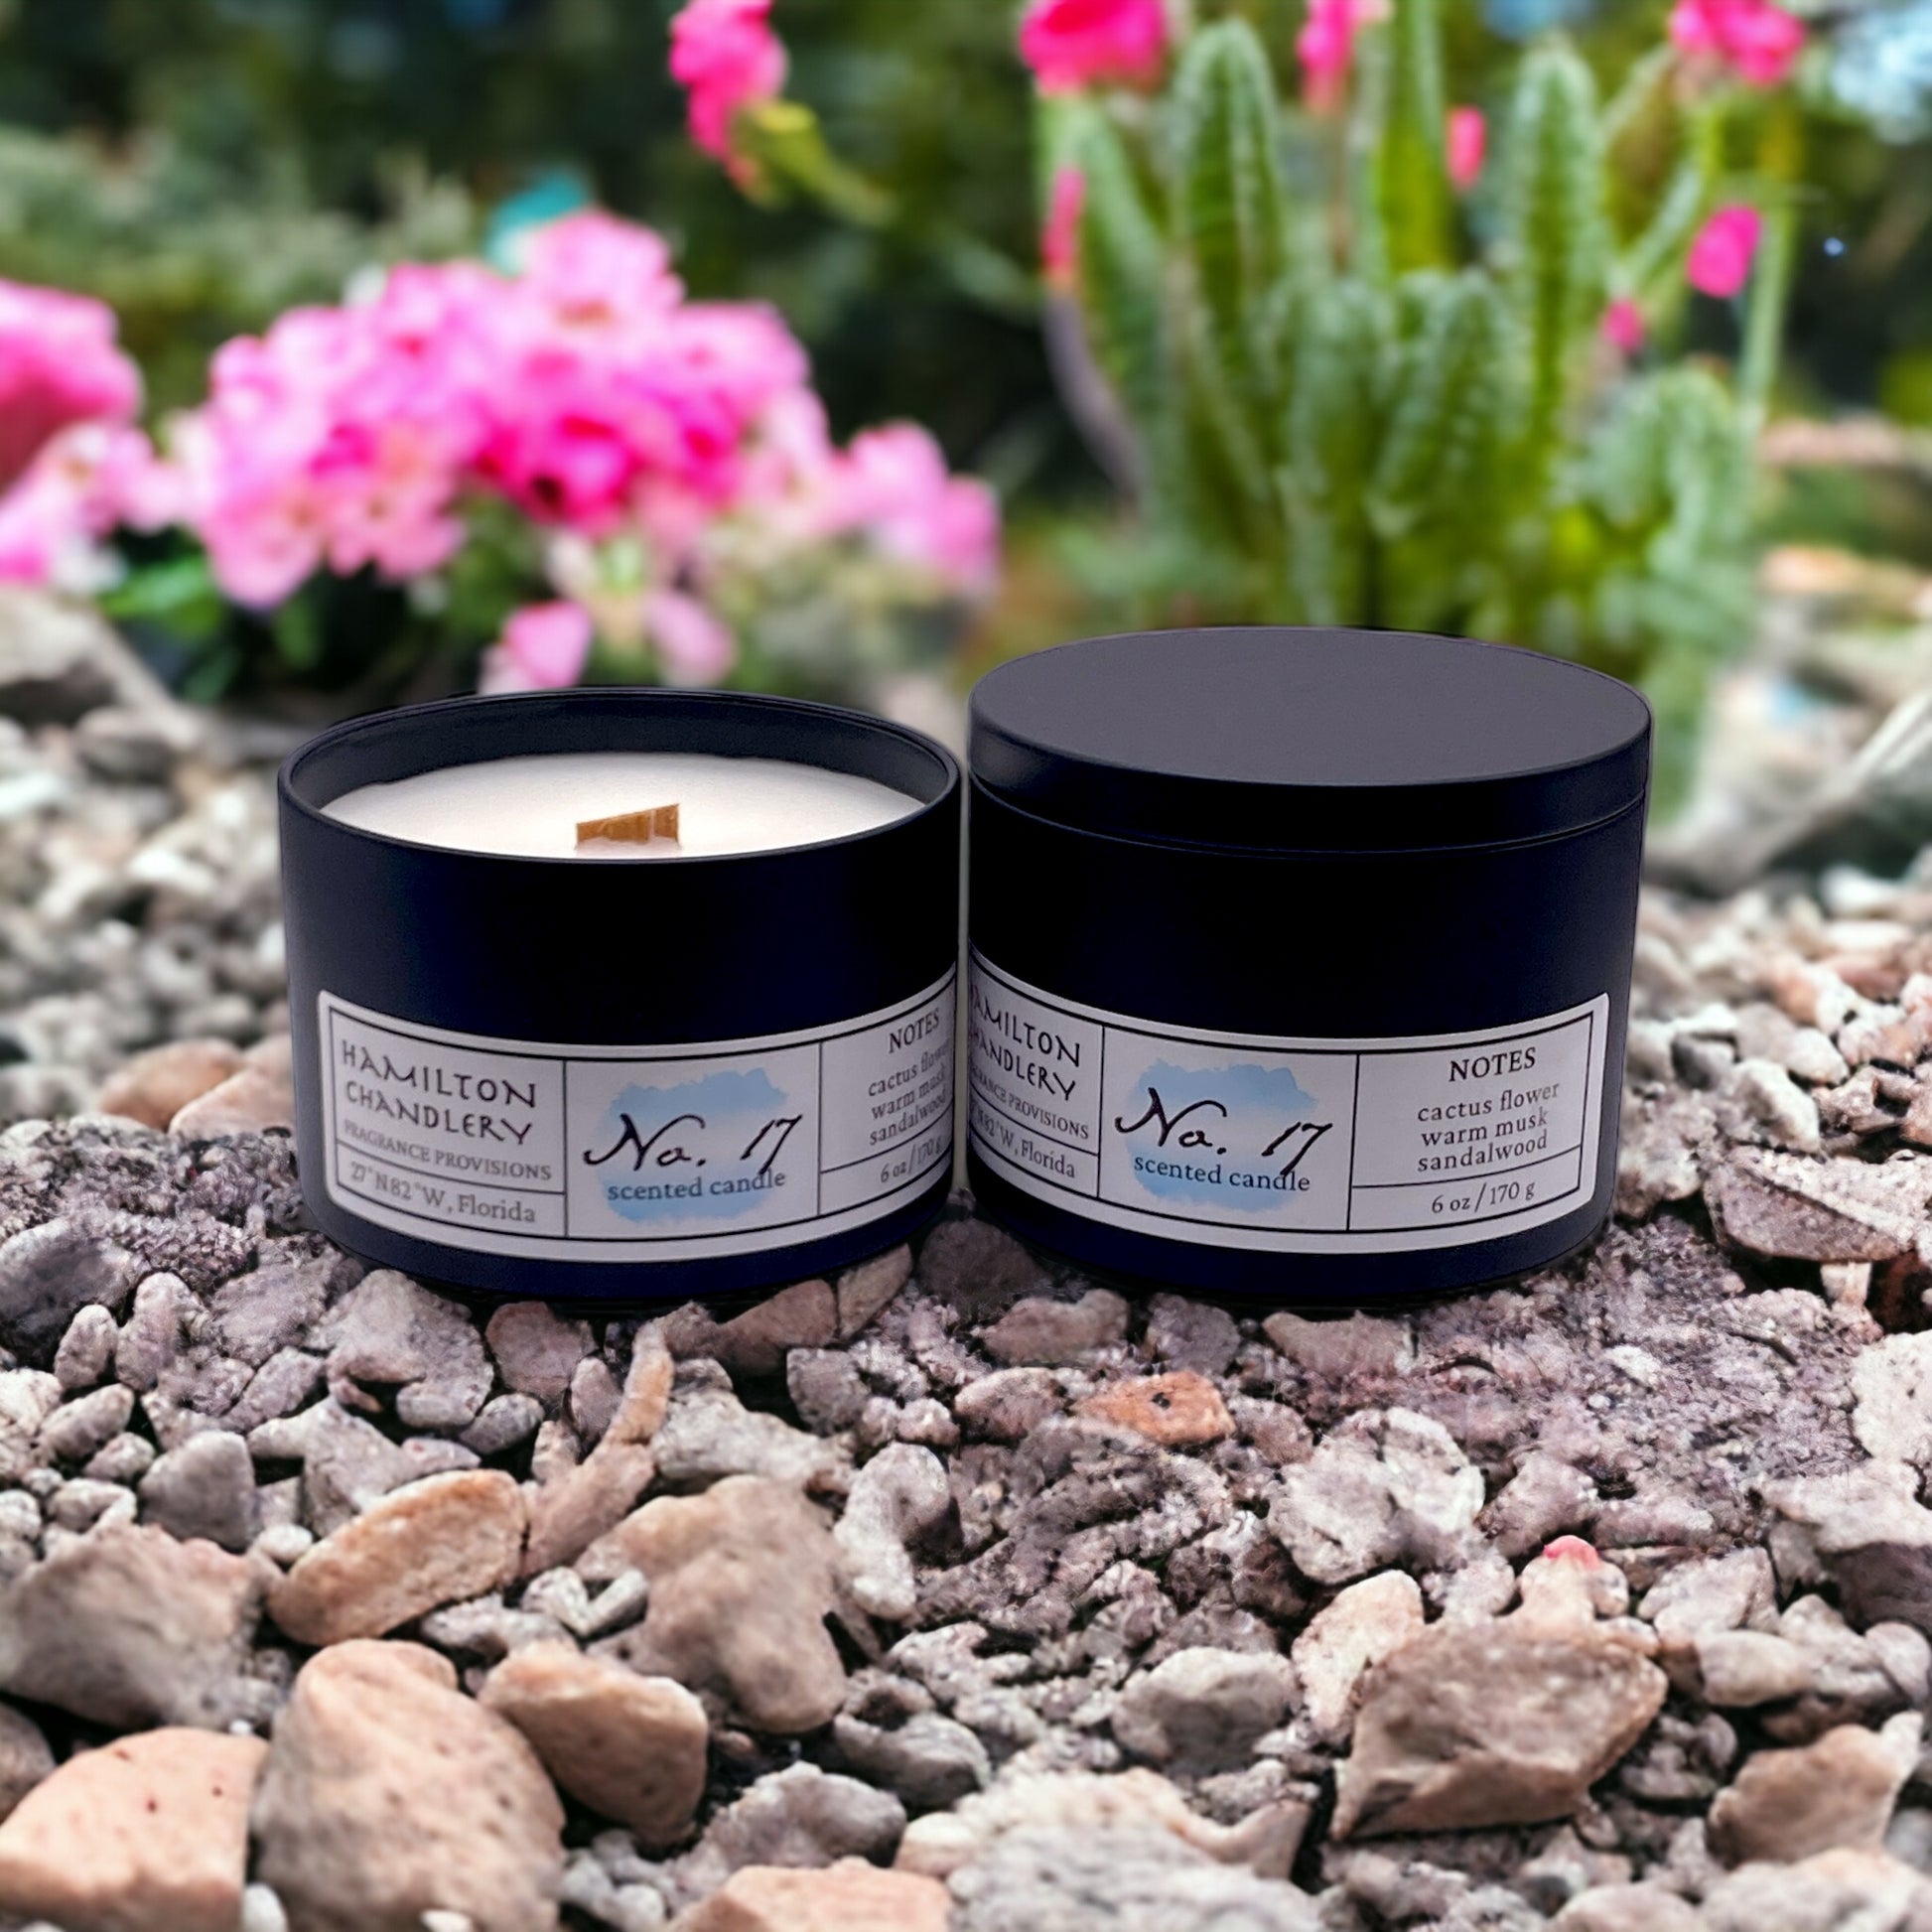 Fragrance No. 17 Travel Tin Candles on Pebble Bed with Cactus Garden in Background | Hamilton Chandlery